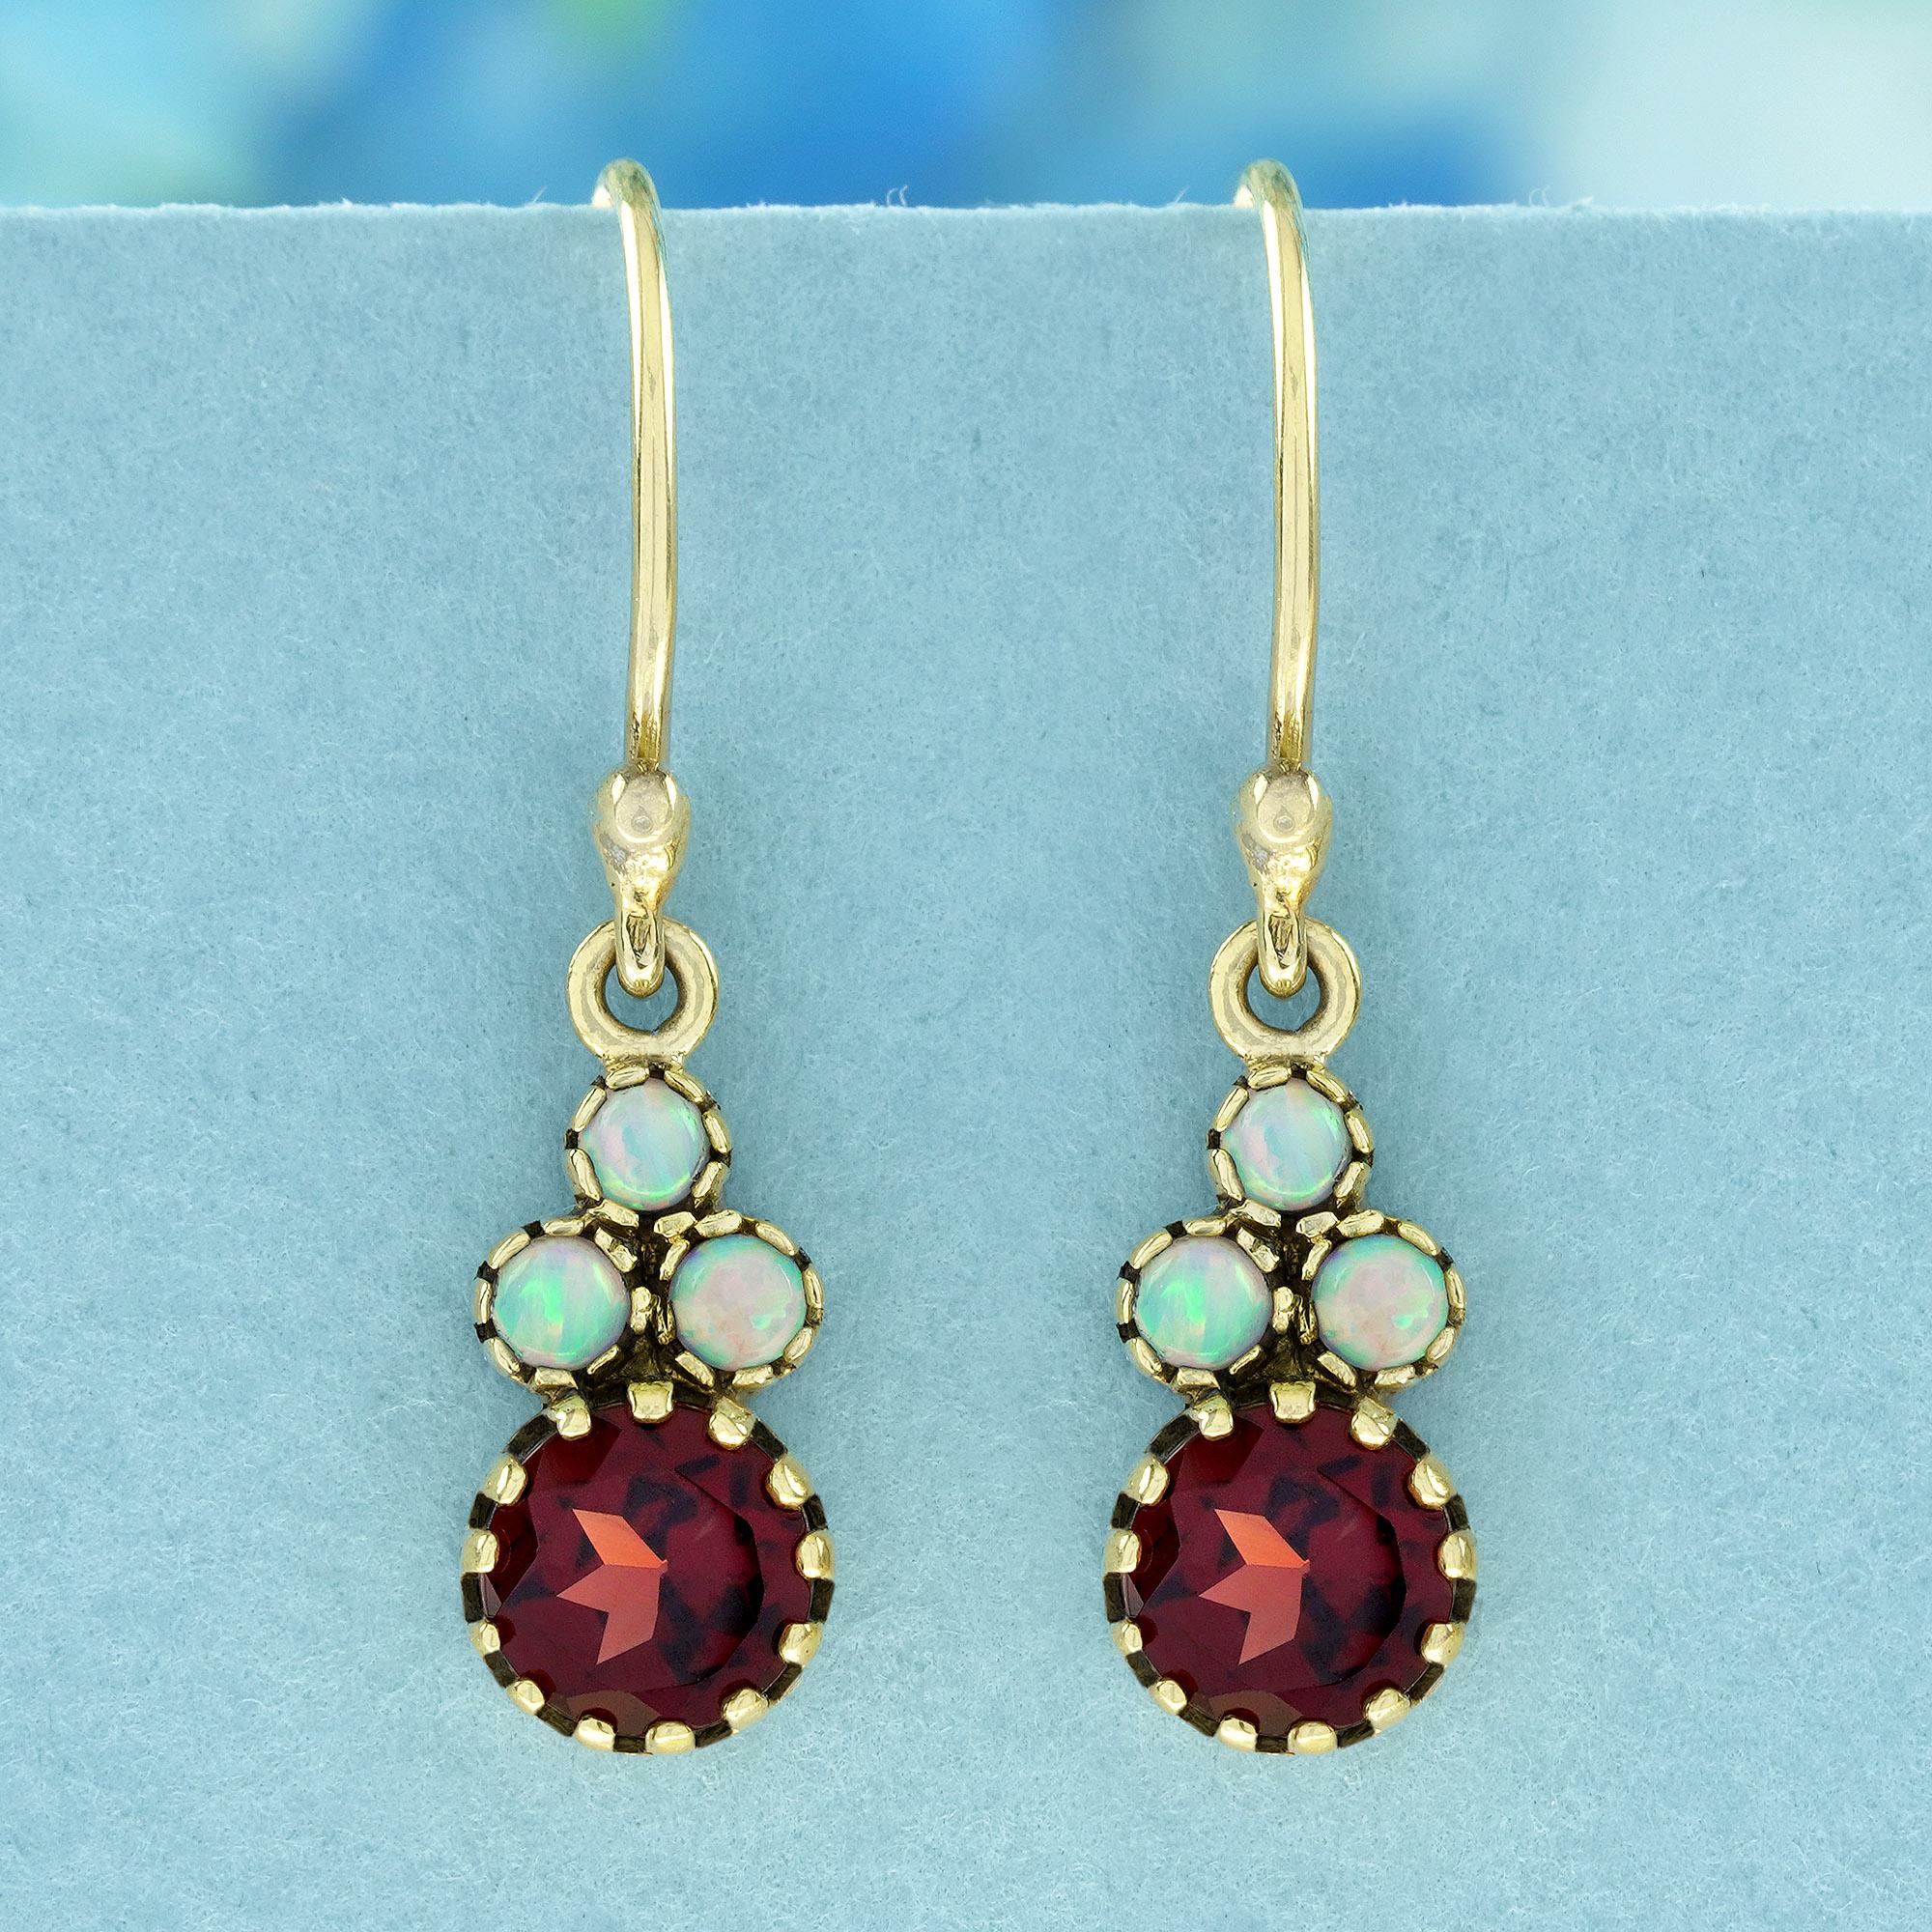 Introducing our exquisite Earrings in yellow gold. Each earring features a lustrous natural garnet gemstone, renowned for its deep, rich red hue and symbolic significance of passion and vitality, come alongside the mesmerizing custer of drop-shaped